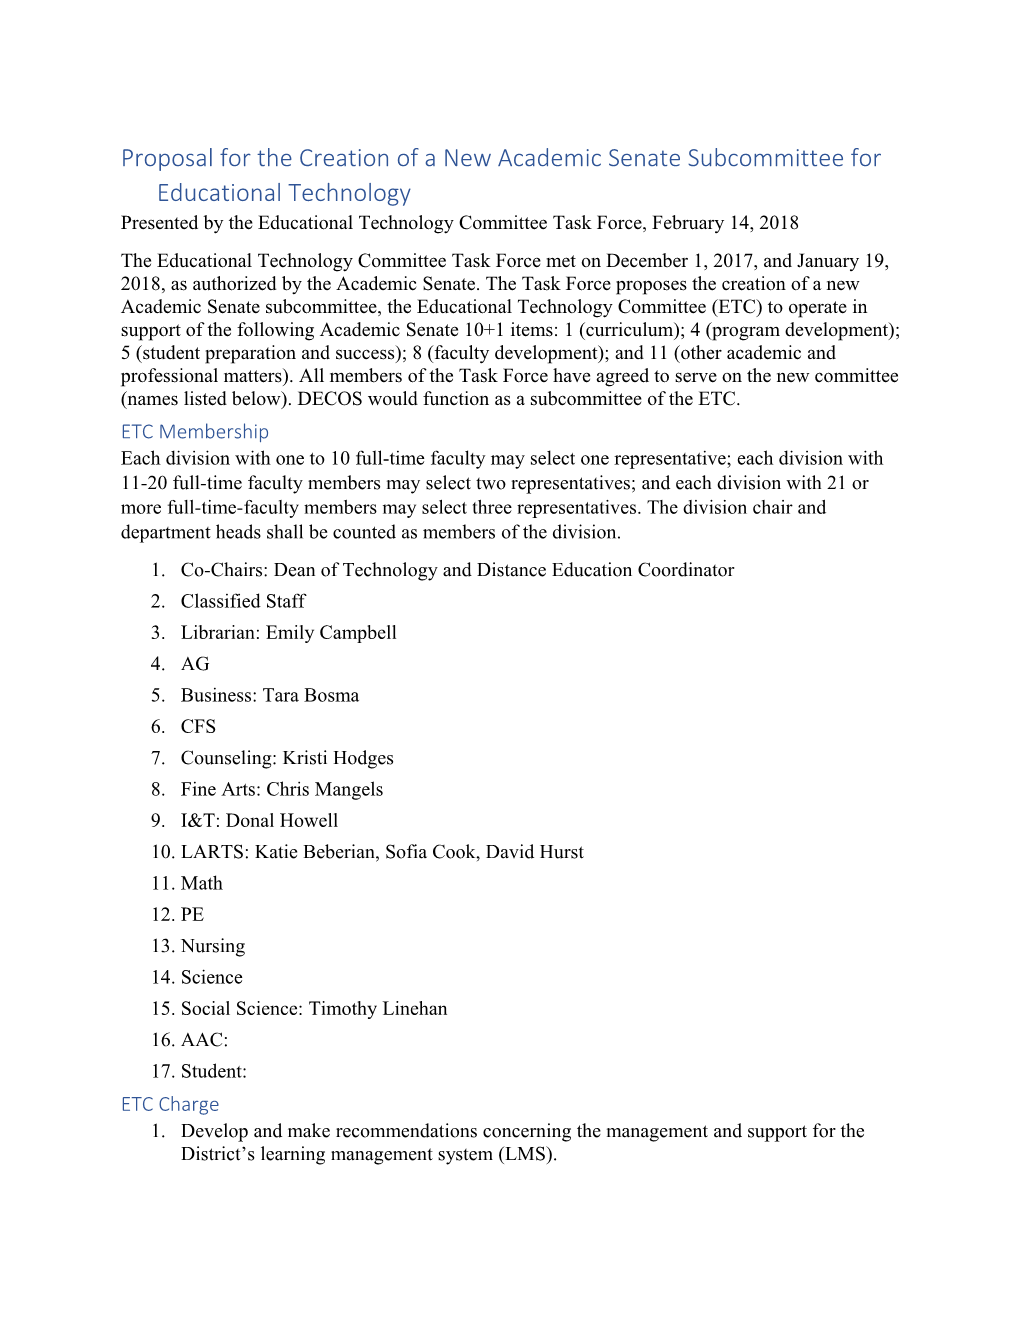 Proposal for the Creation of a New Academic Senate Subcommittee for Educational Technology